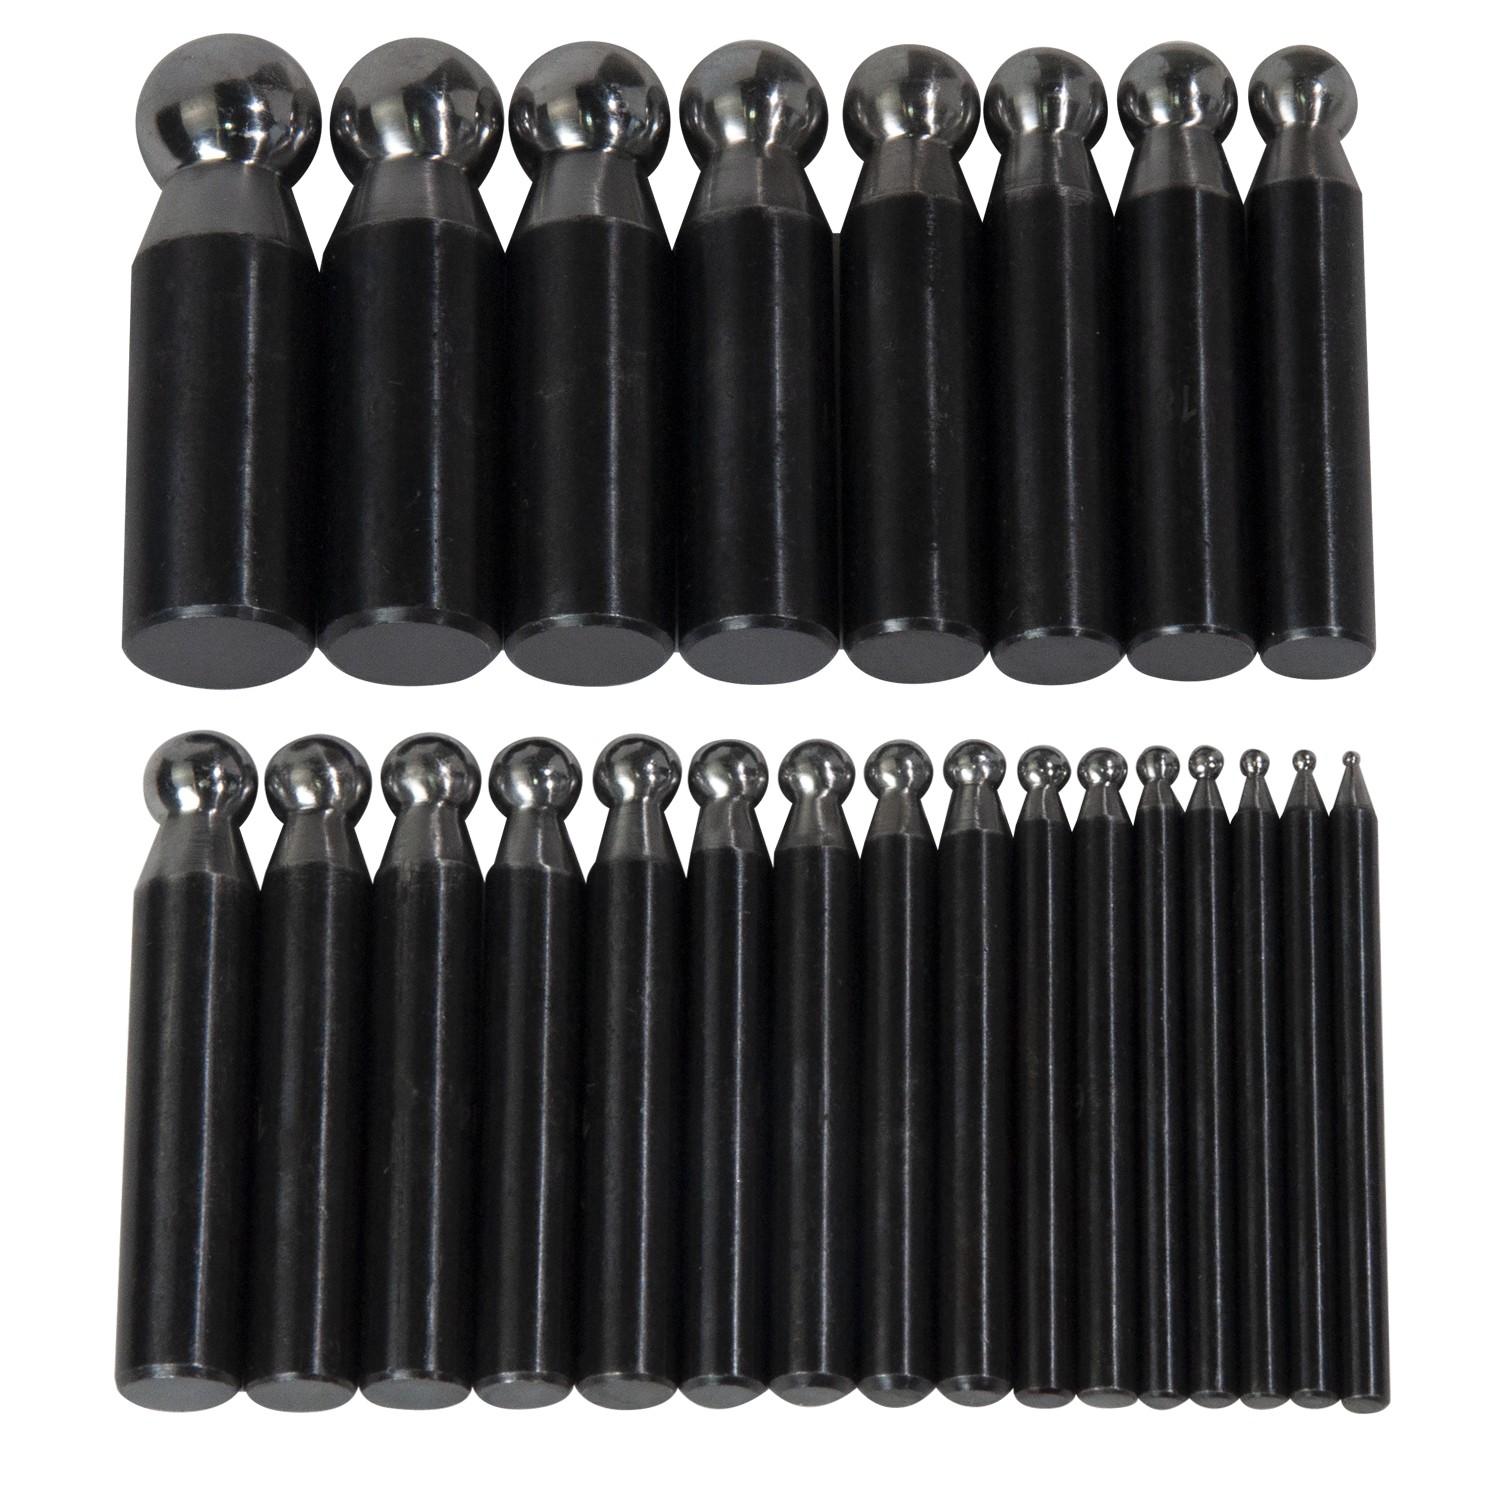 24 Piece Steel Punch Set - 7/64" to 9/16"